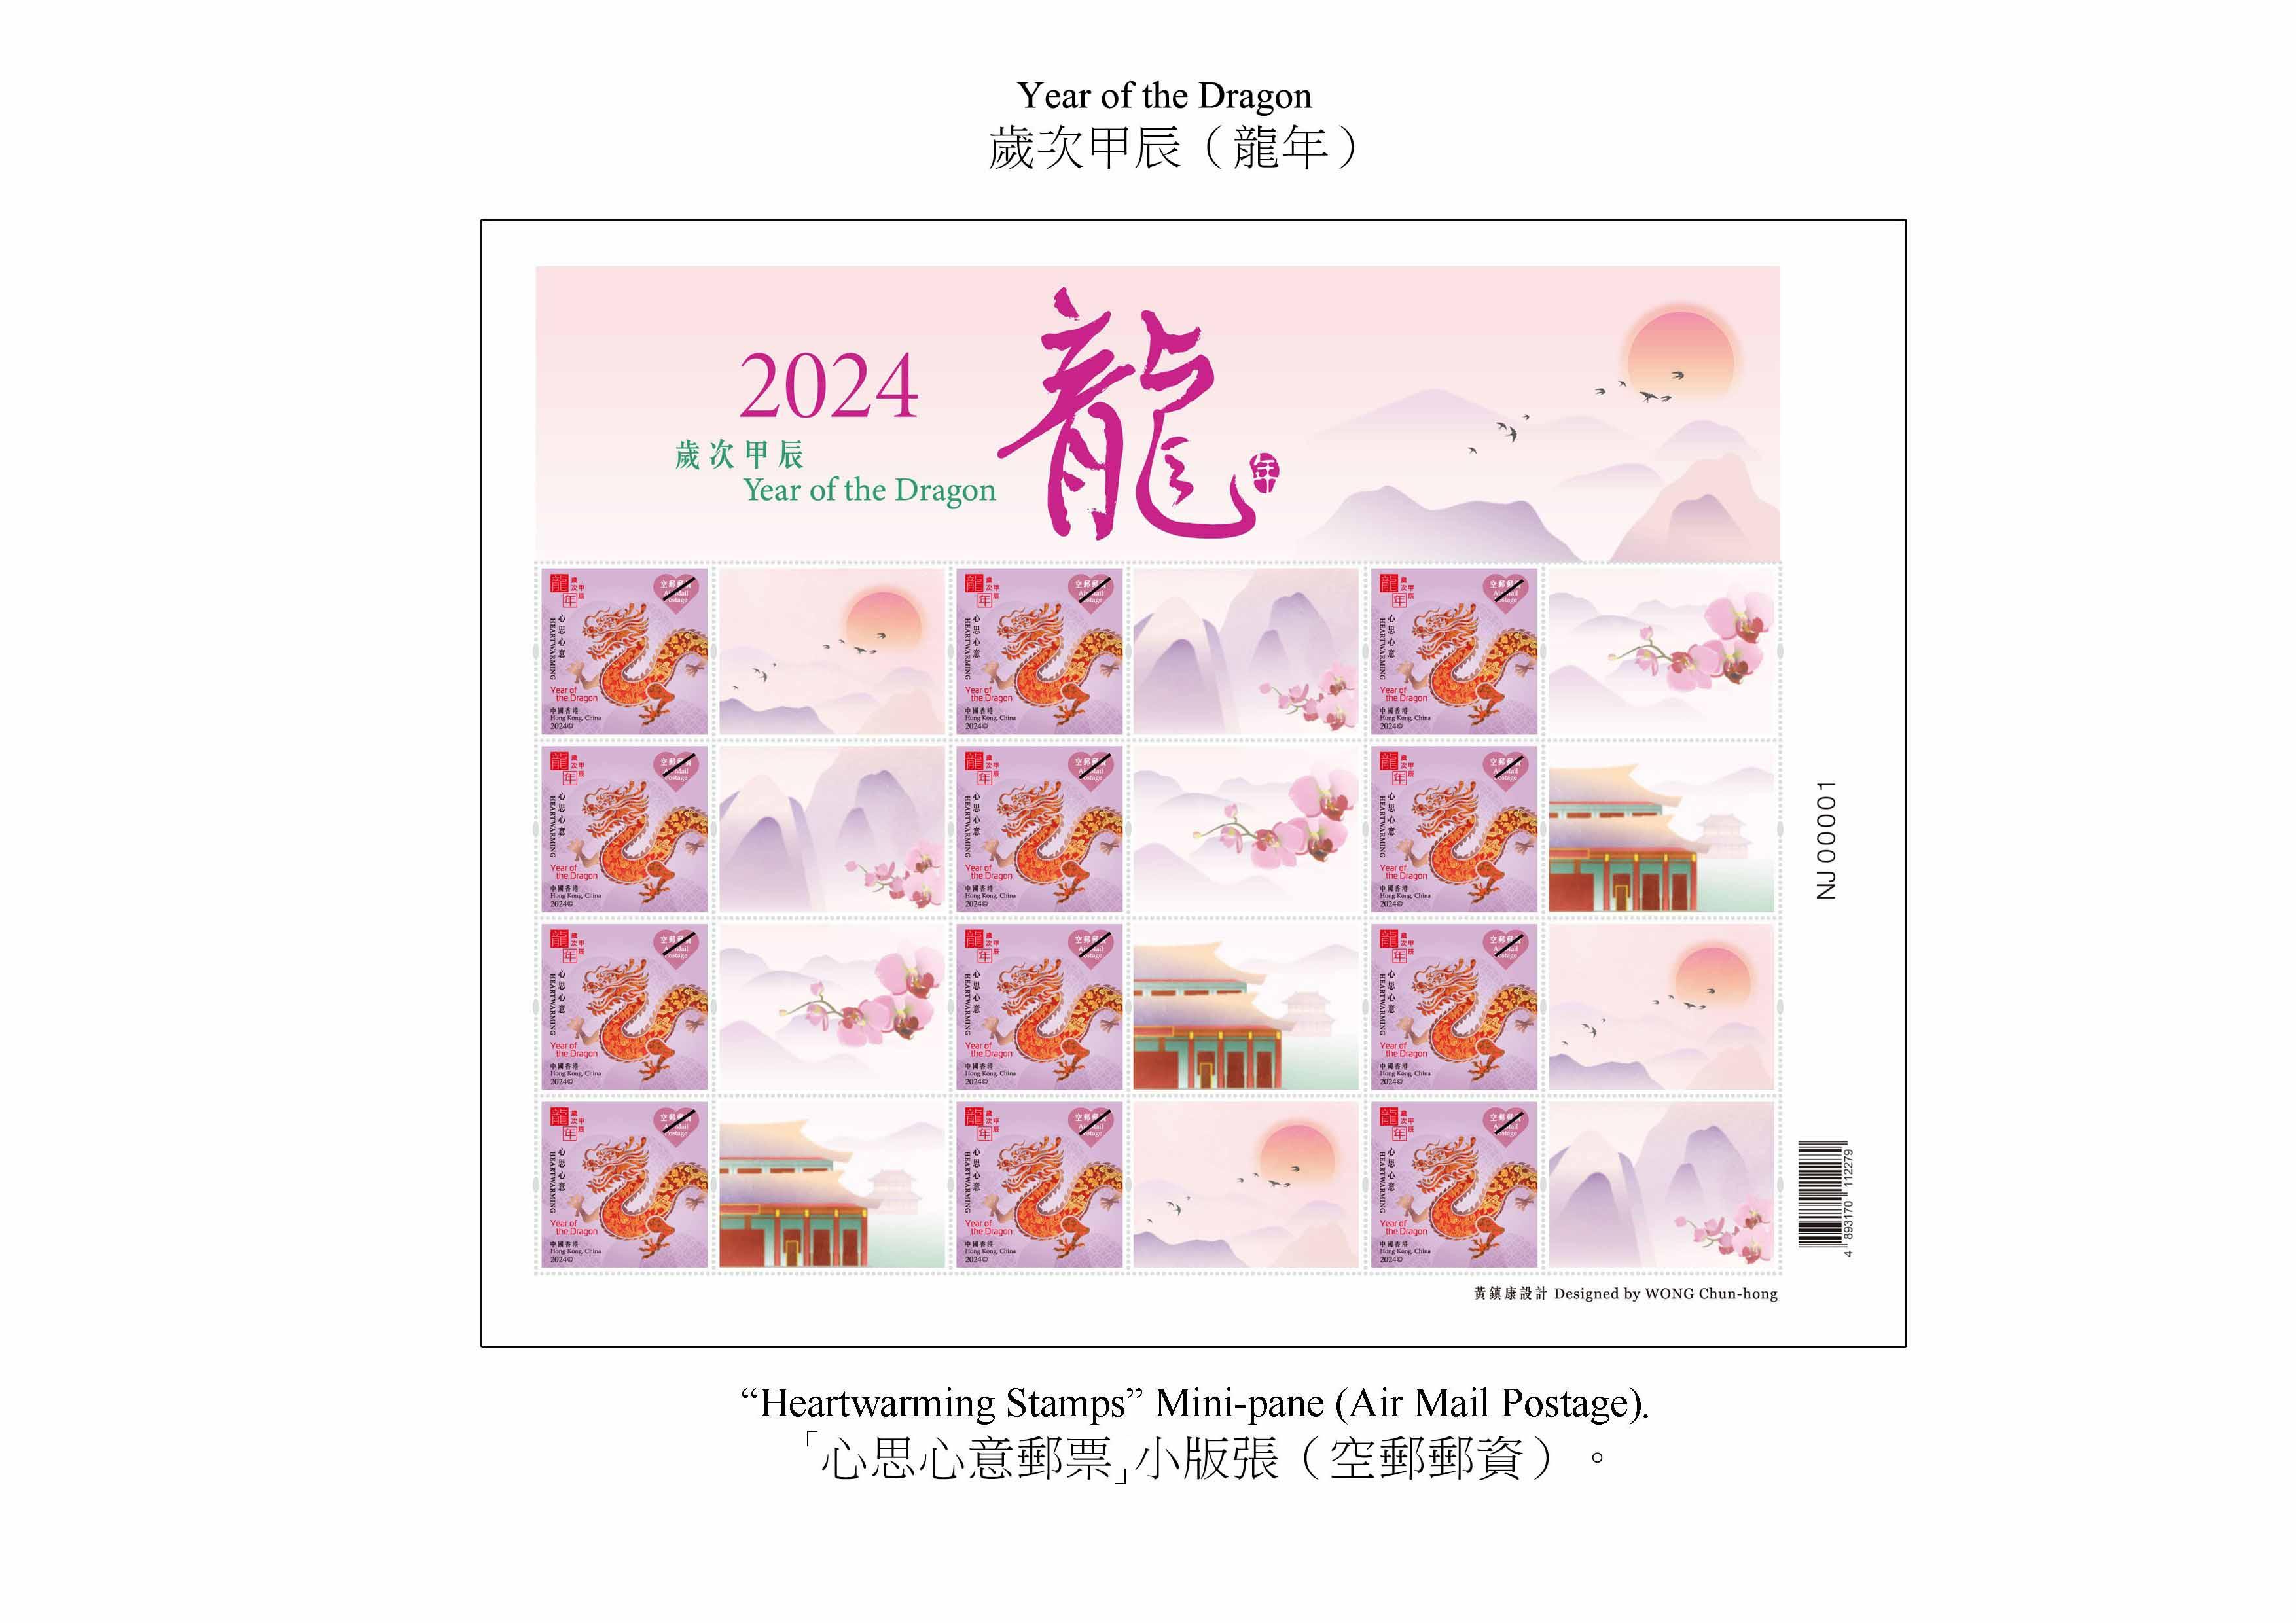 Hongkong Post will launch a special stamp issue and associated philatelic products on the theme of "Year of the Dragon" on January 5, 2024 (Friday). Photo shows the "Heartwarming Stamps" mini-pane (air mail postage).
